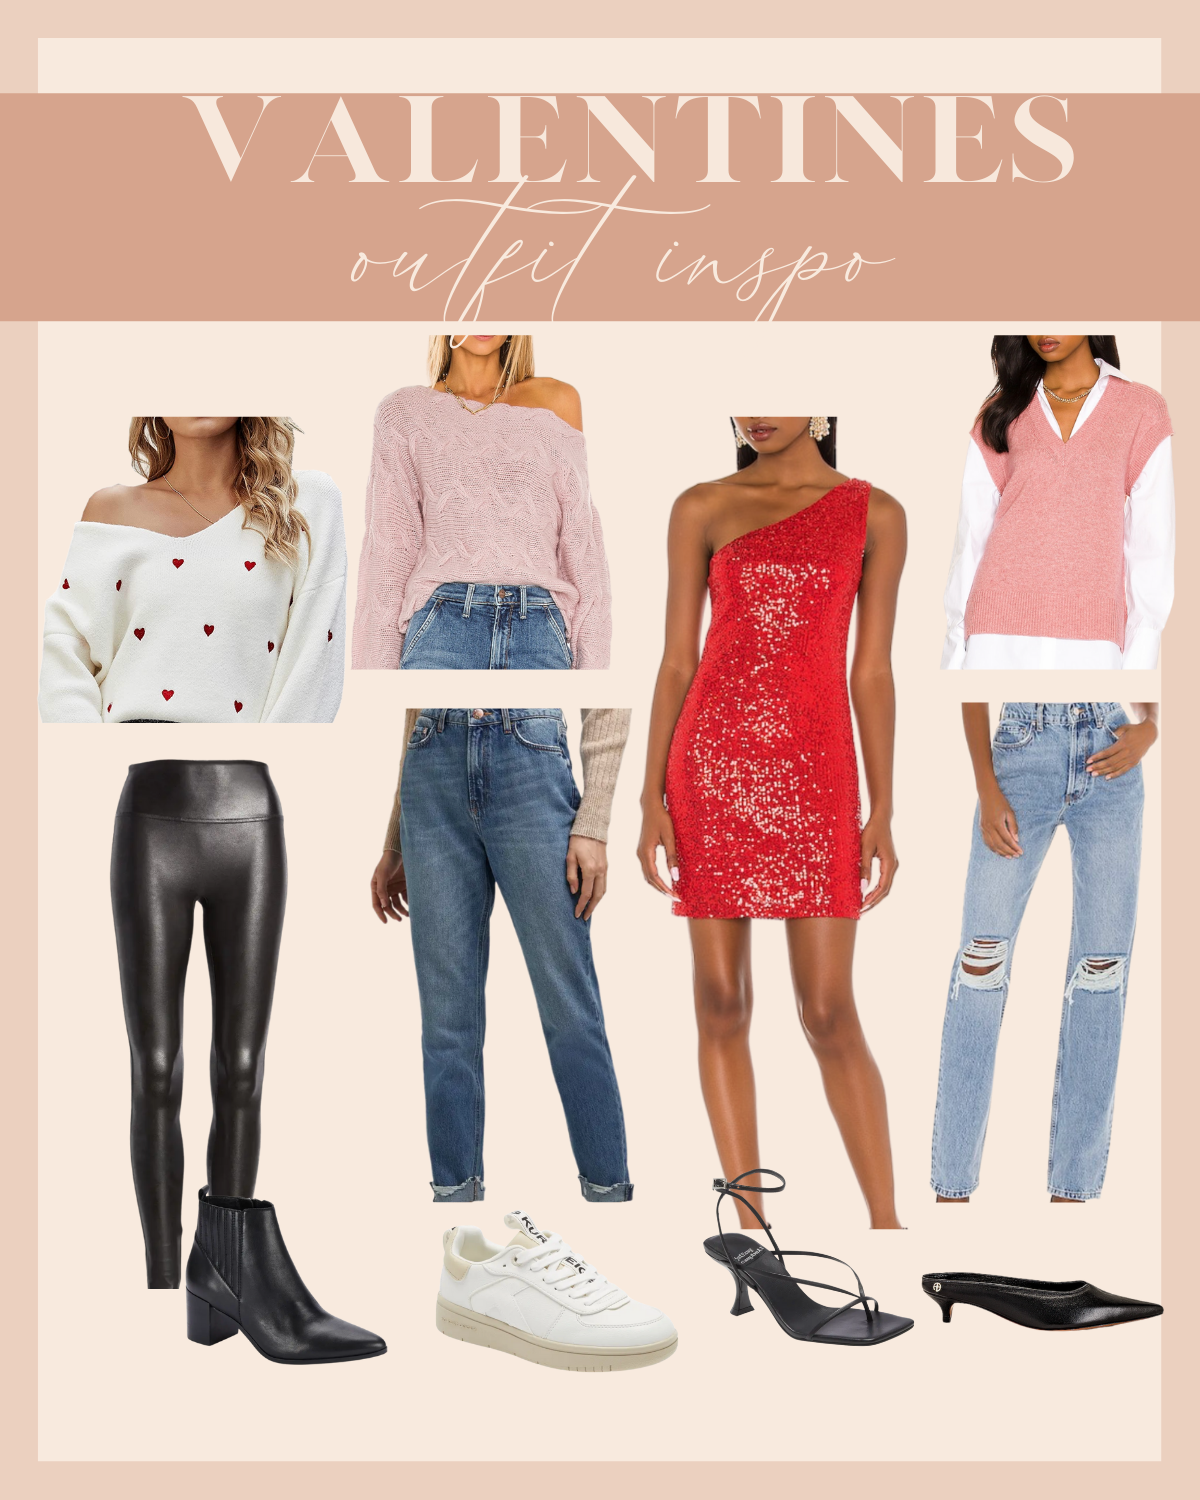 Valentines Day Outfit Inspiration » Style Weekender